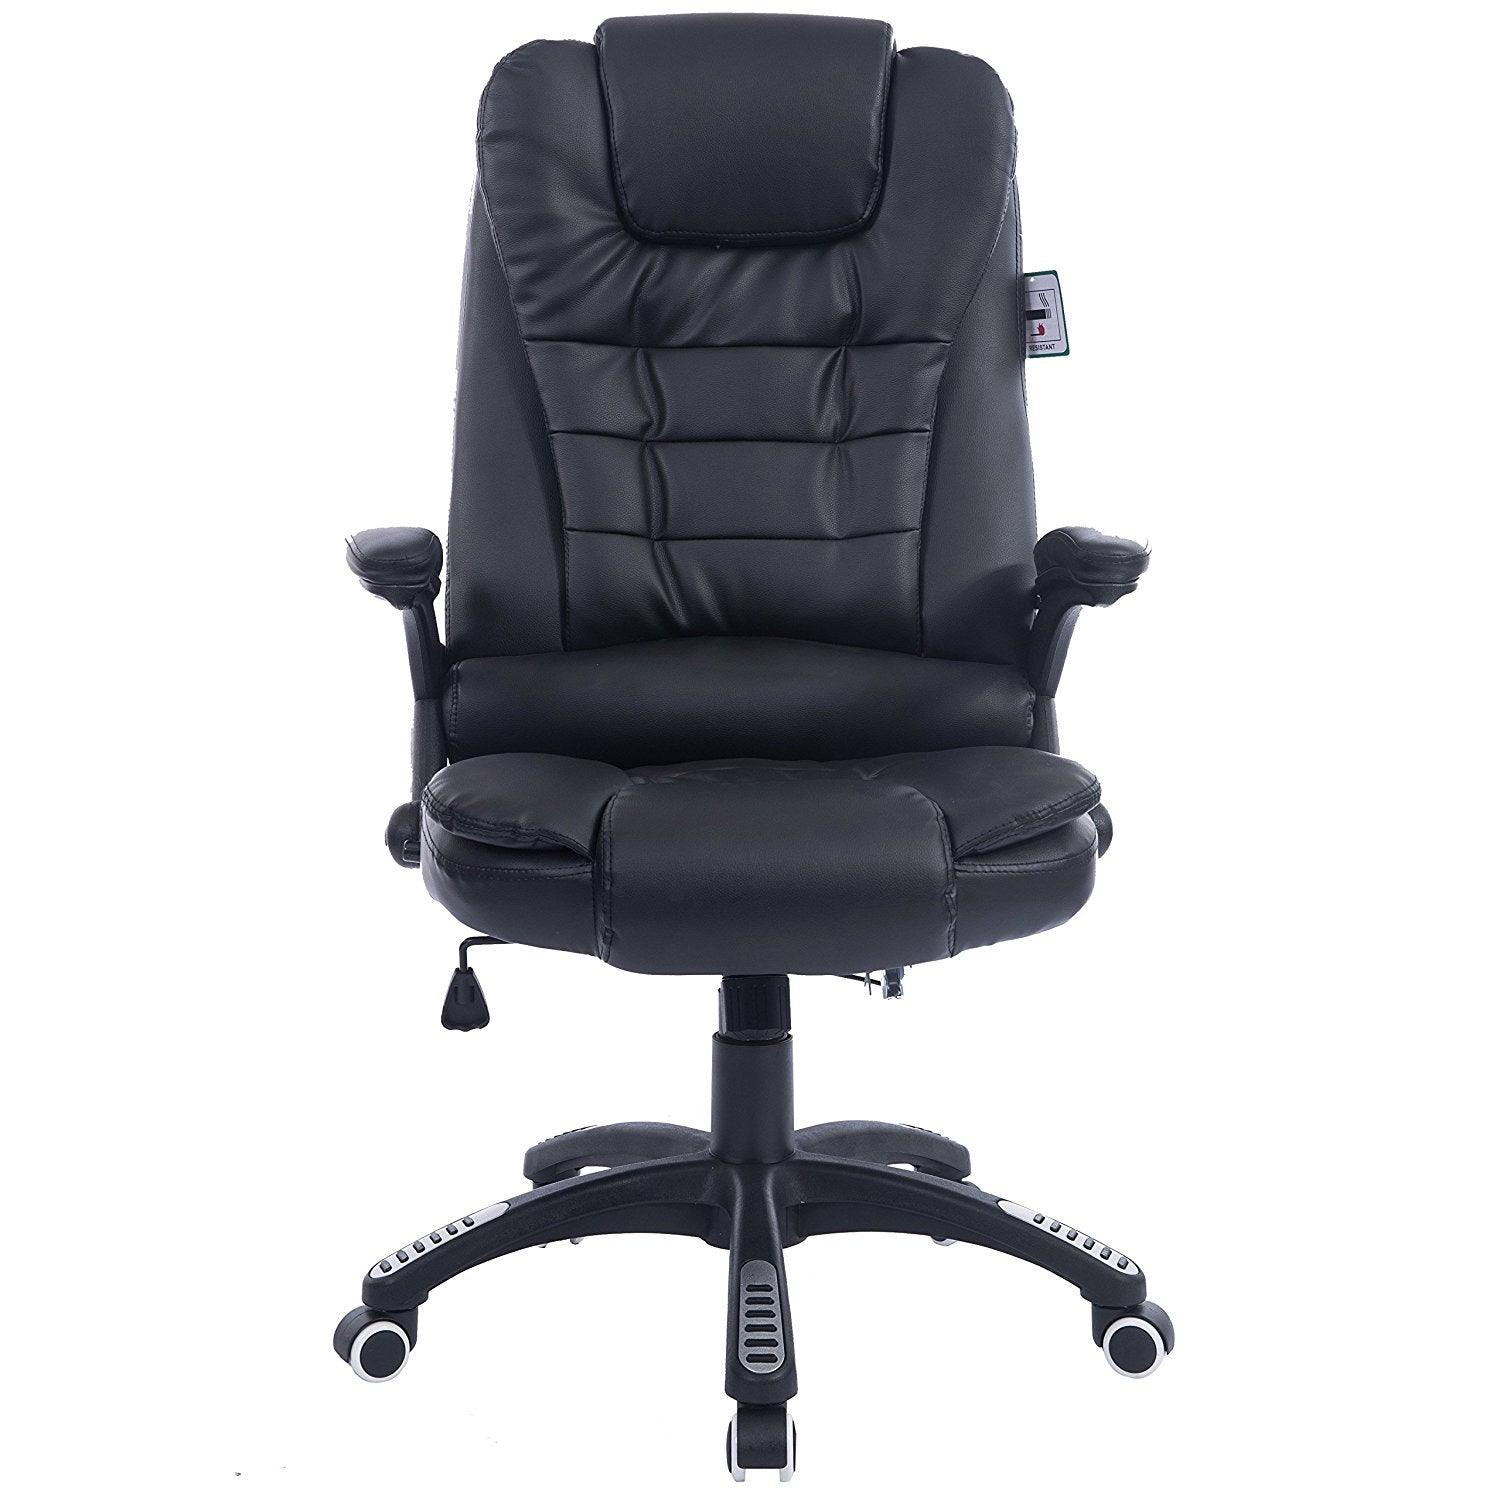 Executive Recline High Back Extra Padded Office Chair, MO17 Black